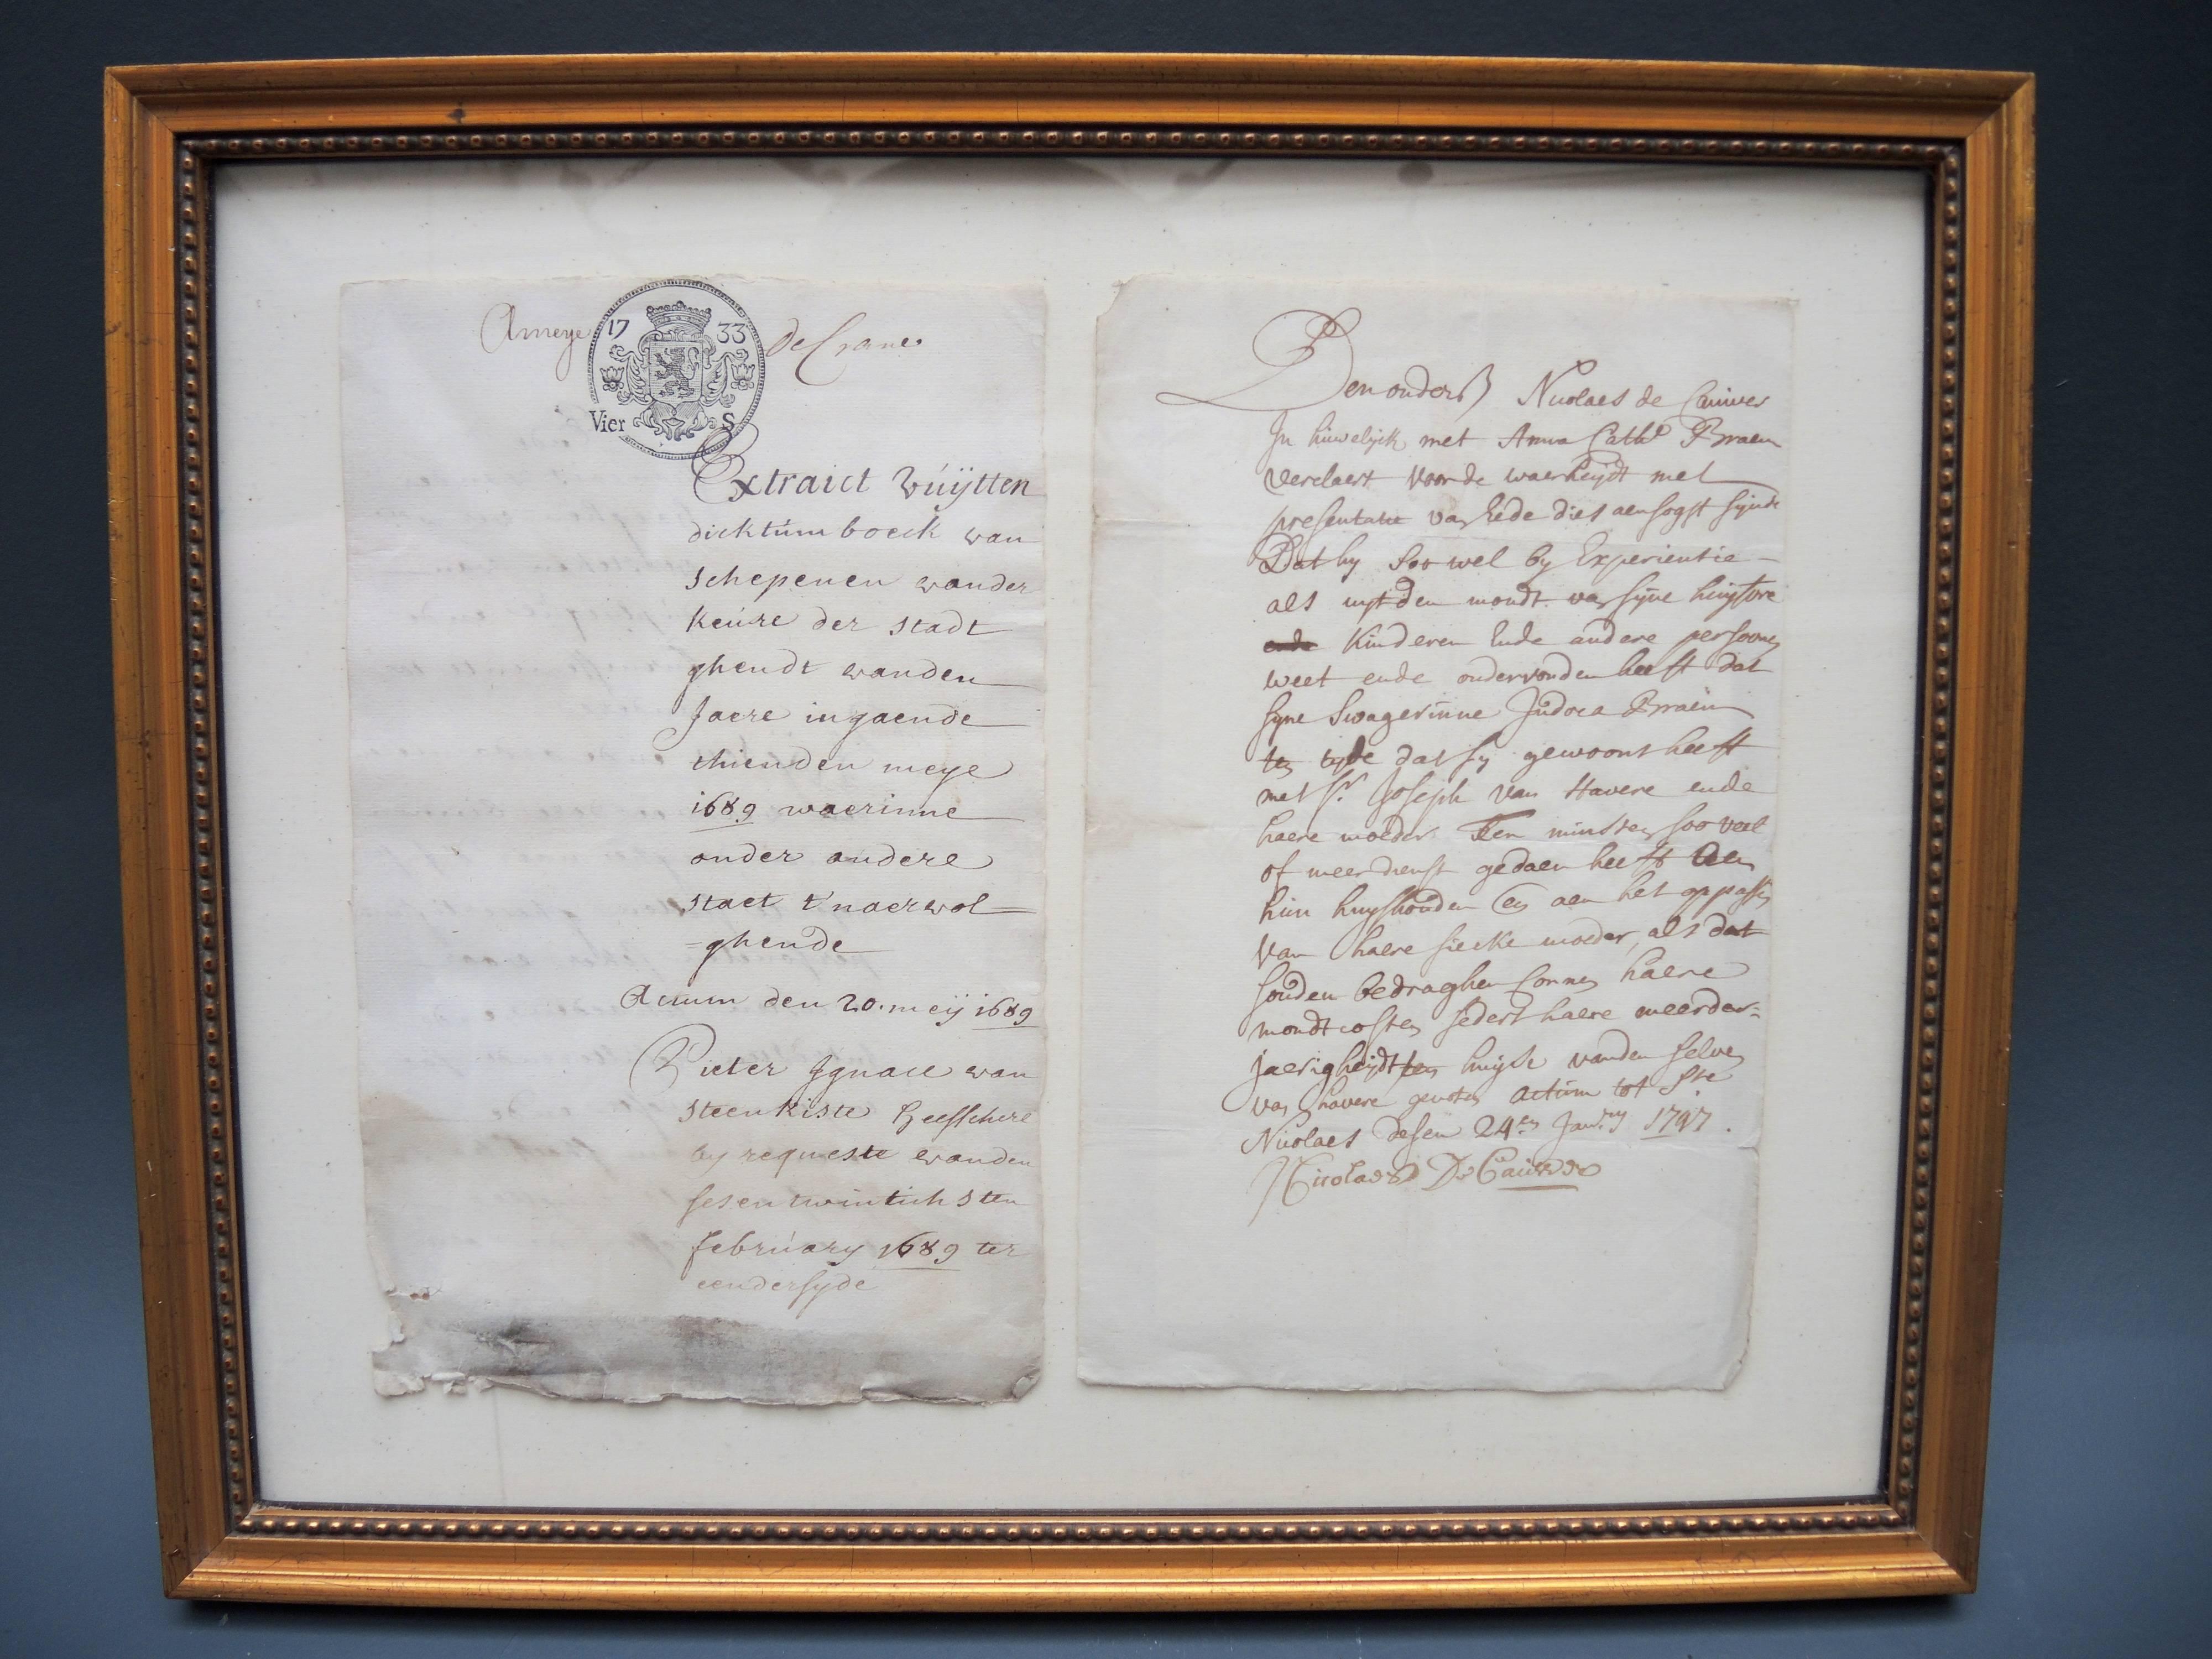 Beautifully hand written documents with the Flemish seal. One dated 1733 and another 1731. Archival framing in gilt frames.
